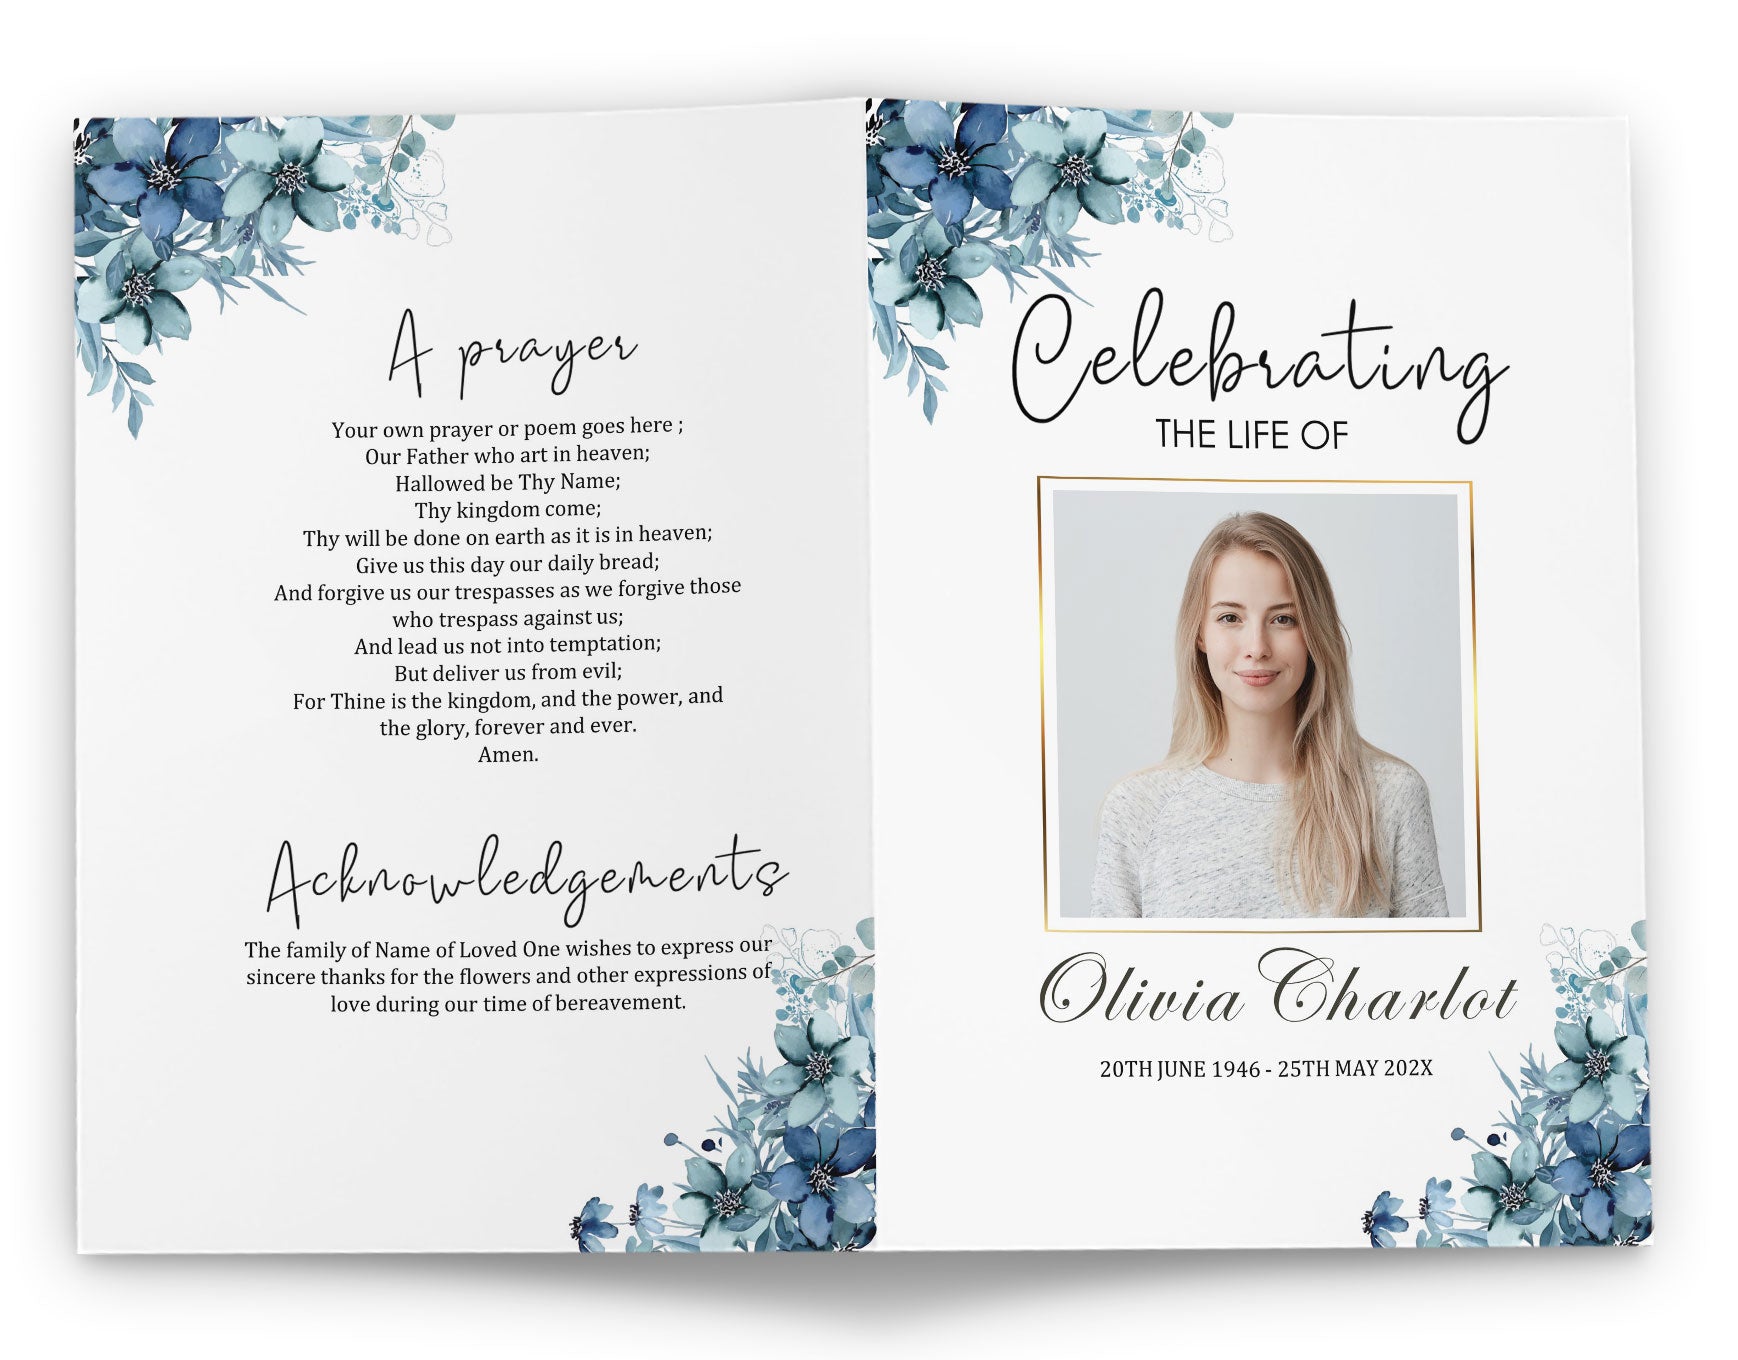 How to plan a celebration of life